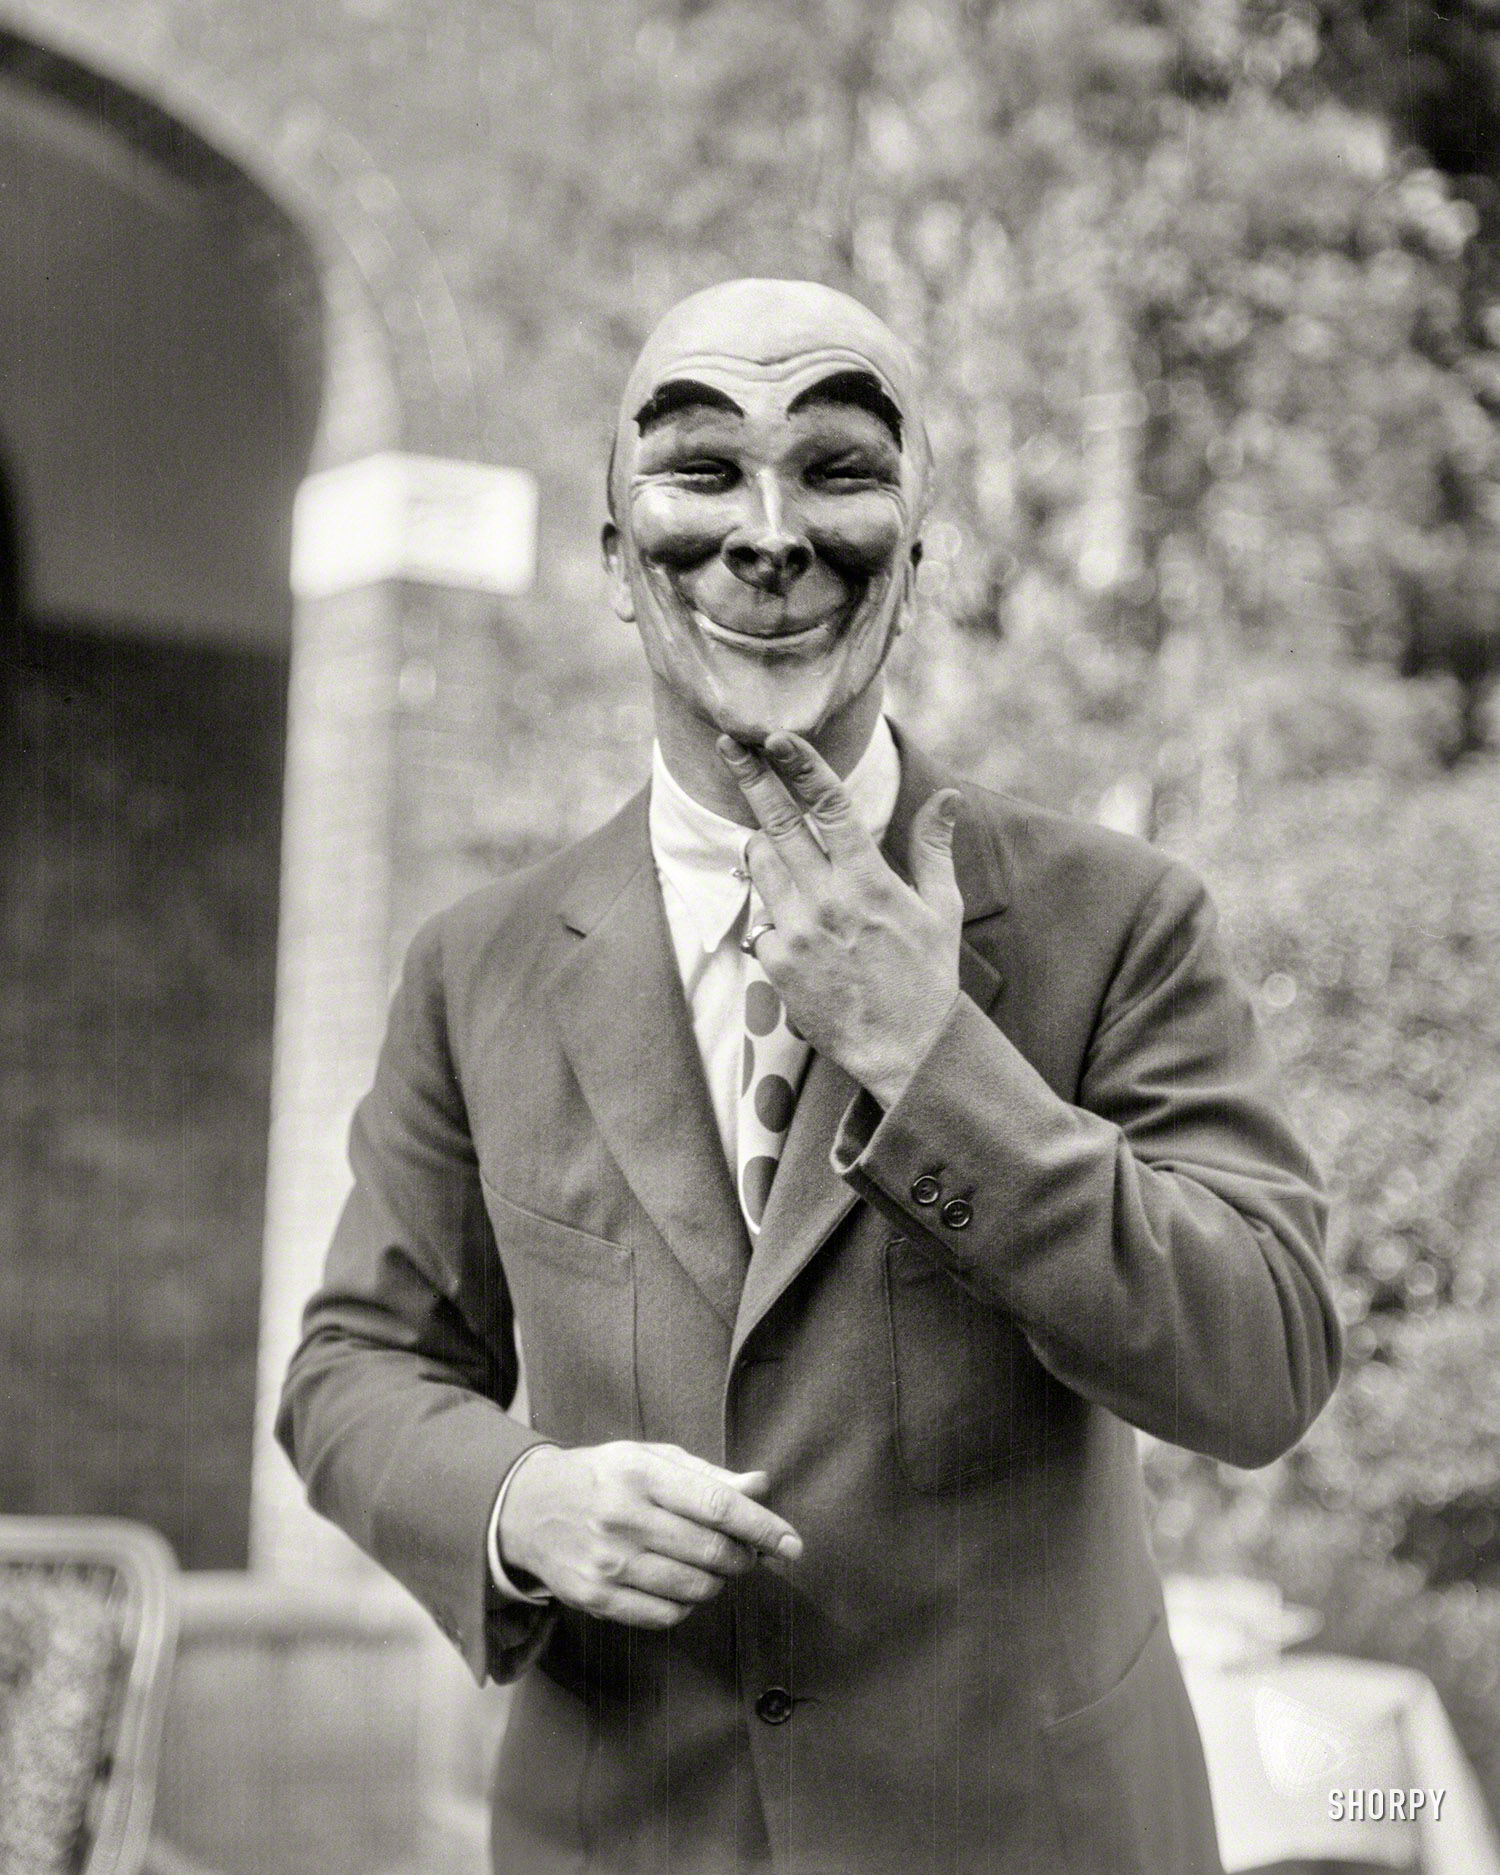 Sept. 20, 1925. "Man wearing a mask made by W.T. Benda." Our introduction to the creations of Polish-born artist and costume designer Wladyslaw Teodor Benda (1873-1948). 4x5 nitrate negative by Arnold Genthe. View full size.